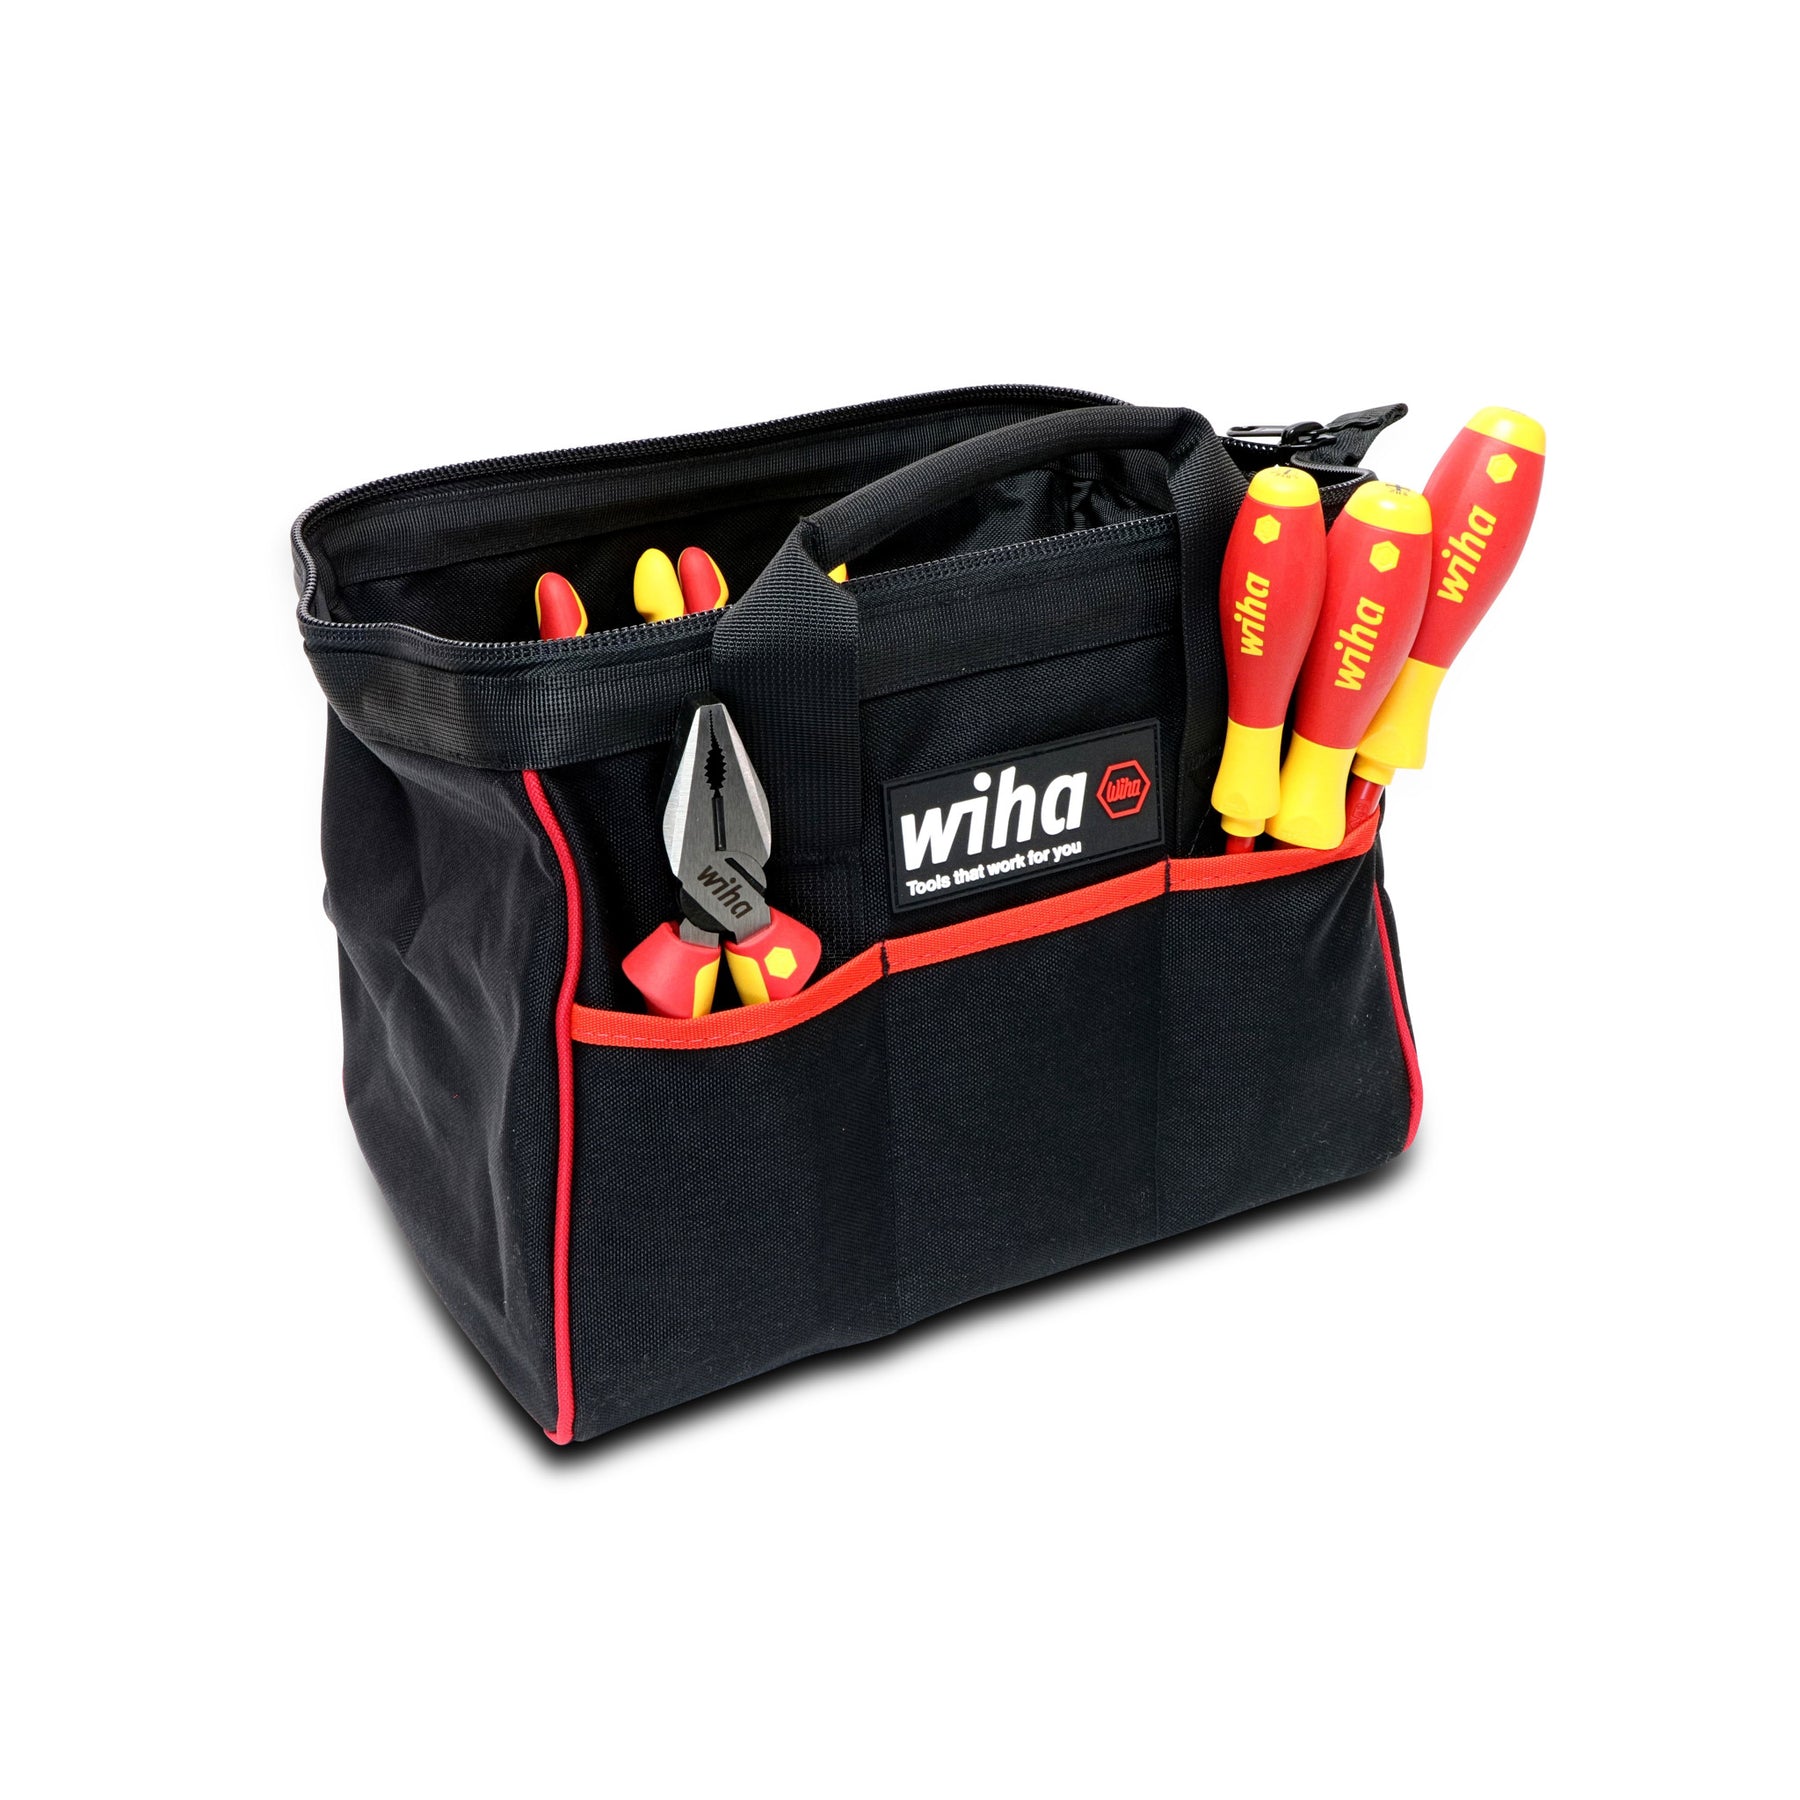 Wiha 32892 Insulated Pliers/Cutters & Drivers Set